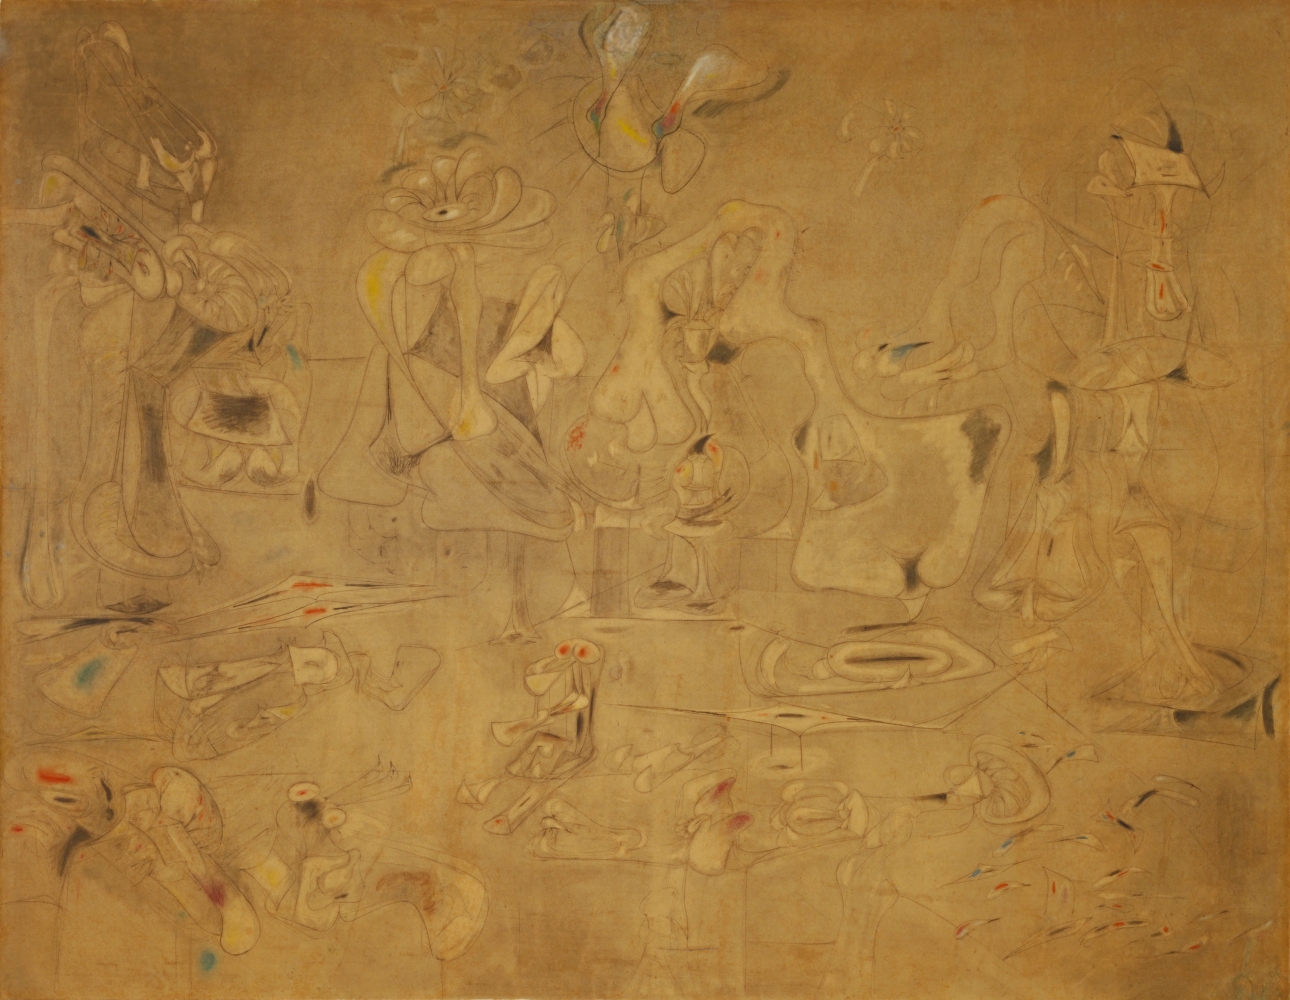 Summation, 1947,&amp;nbsp;charcoal, graphite pencil, and pastel on paper mounted on board, 79 5/8 x 101 3/4 in. (202.2 x 258.4 cm). The Museum of Modern Art, New York. Nina and Gordon Bunshaft Fund, 234.1969. Digital Image &amp;copy; The Museum of Modern Art/Licensed by SCALA / Art Resource, NY.&amp;nbsp;[AGCR: D1486]